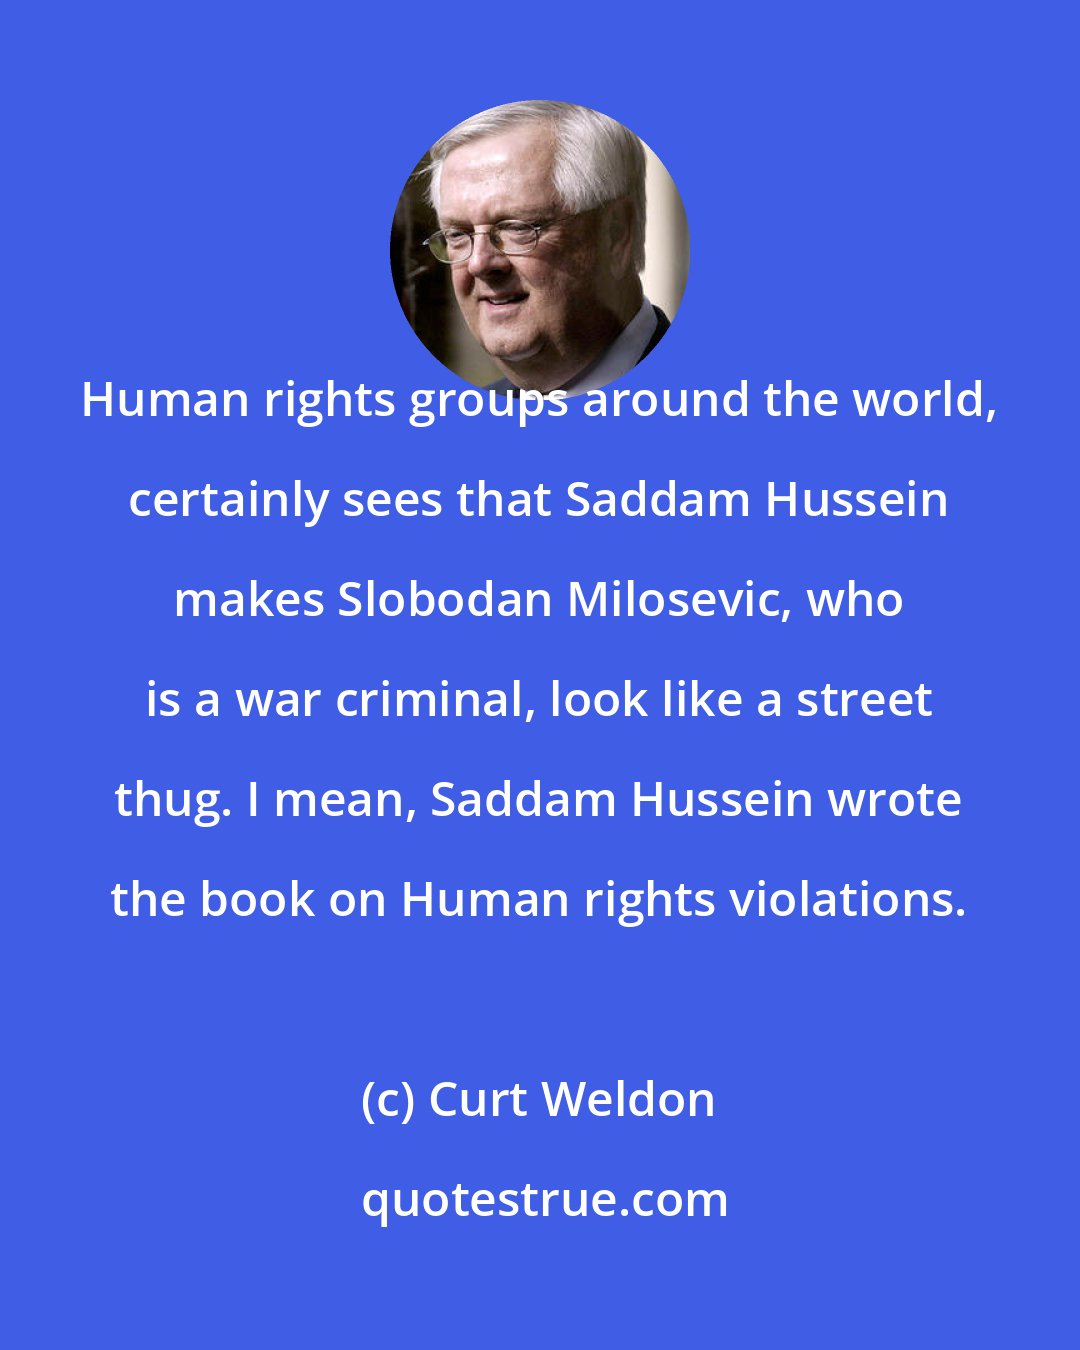 Curt Weldon: Human rights groups around the world, certainly sees that Saddam Hussein makes Slobodan Milosevic, who is a war criminal, look like a street thug. I mean, Saddam Hussein wrote the book on Human rights violations.